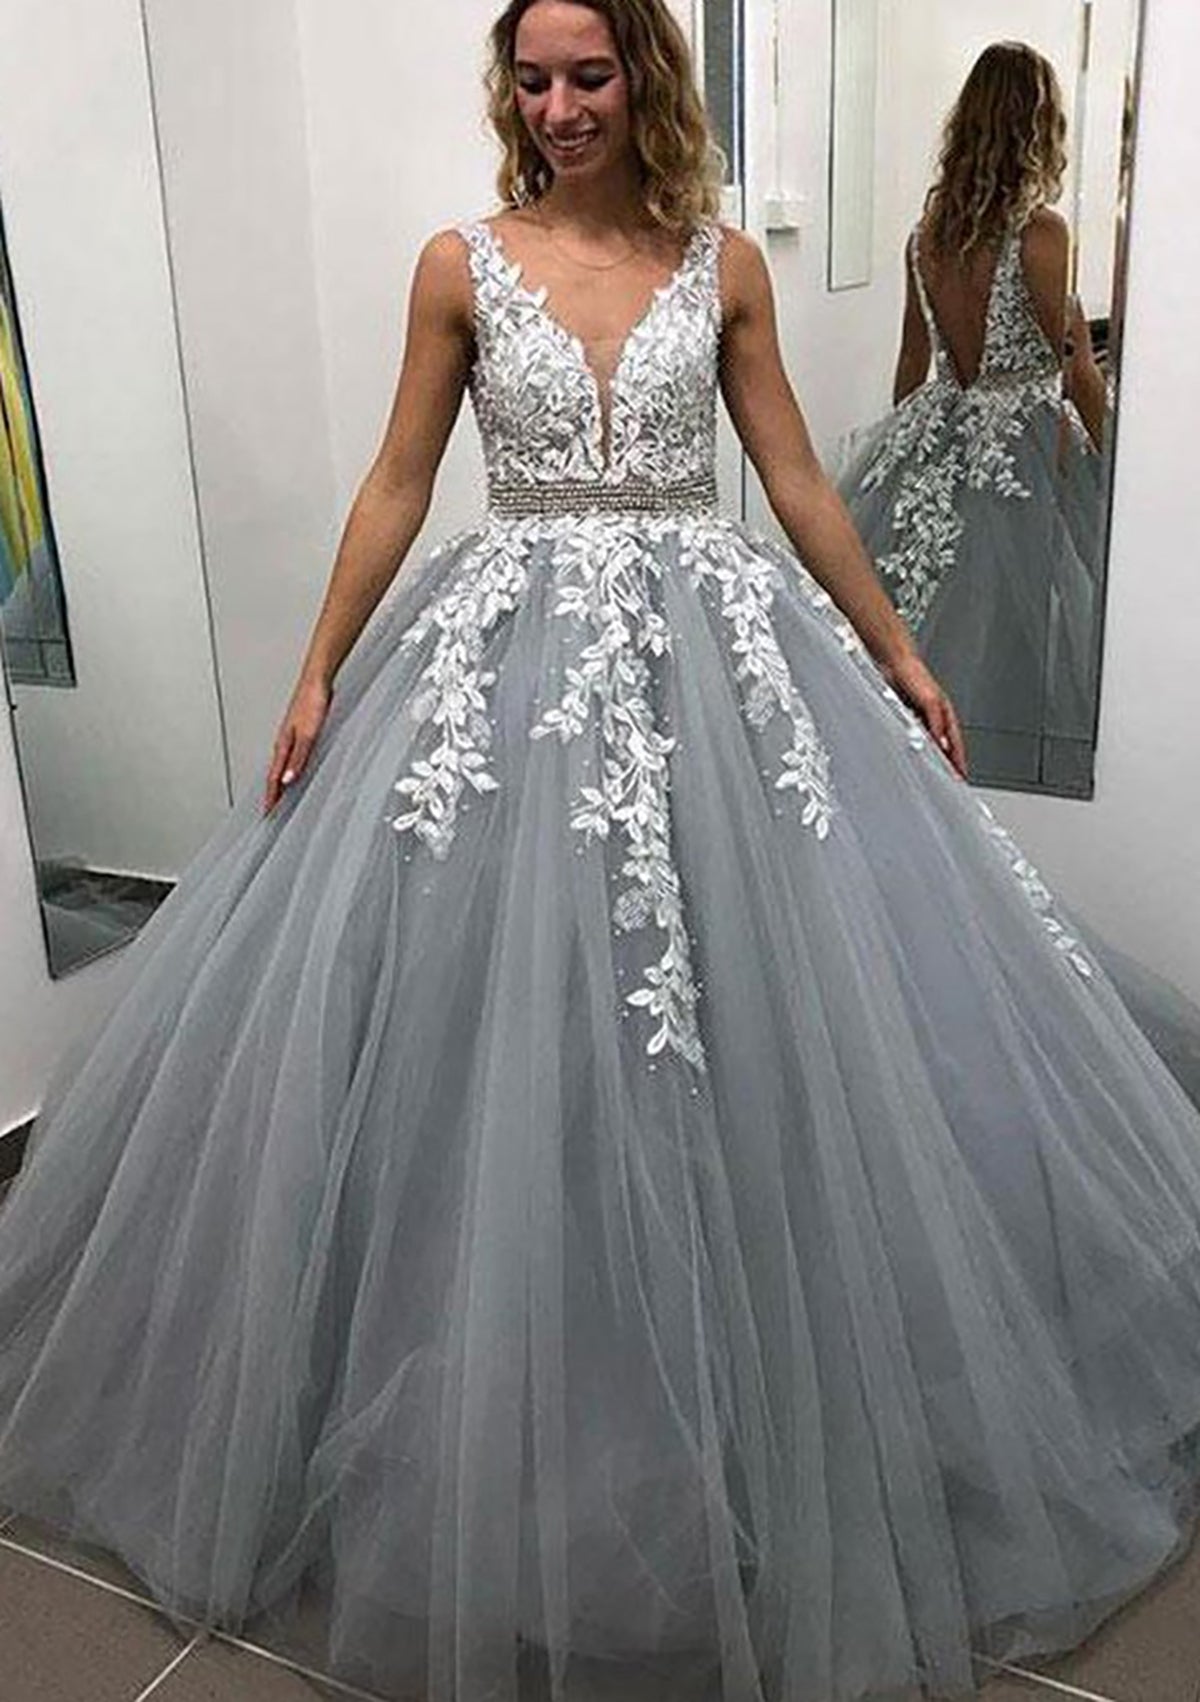 Ball Gown Sleeveless Long/Floor-Length Tulle Prom Dress With Lace Appliqued Beading - dennisdresses